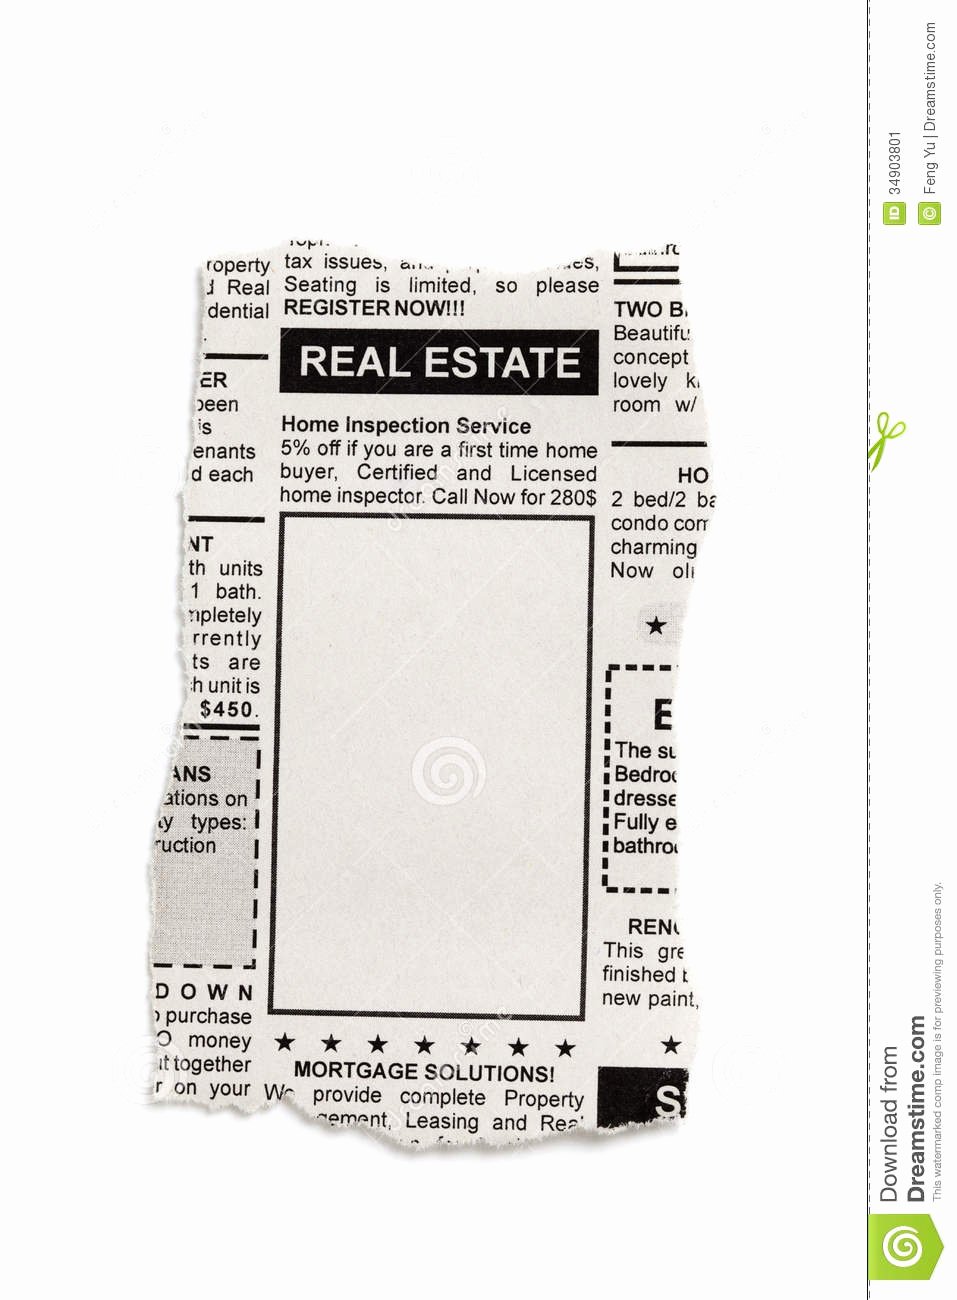 Newspaper Advertisement Template Elegant Real Estate Ad Stock Image Image Of Backgrounds